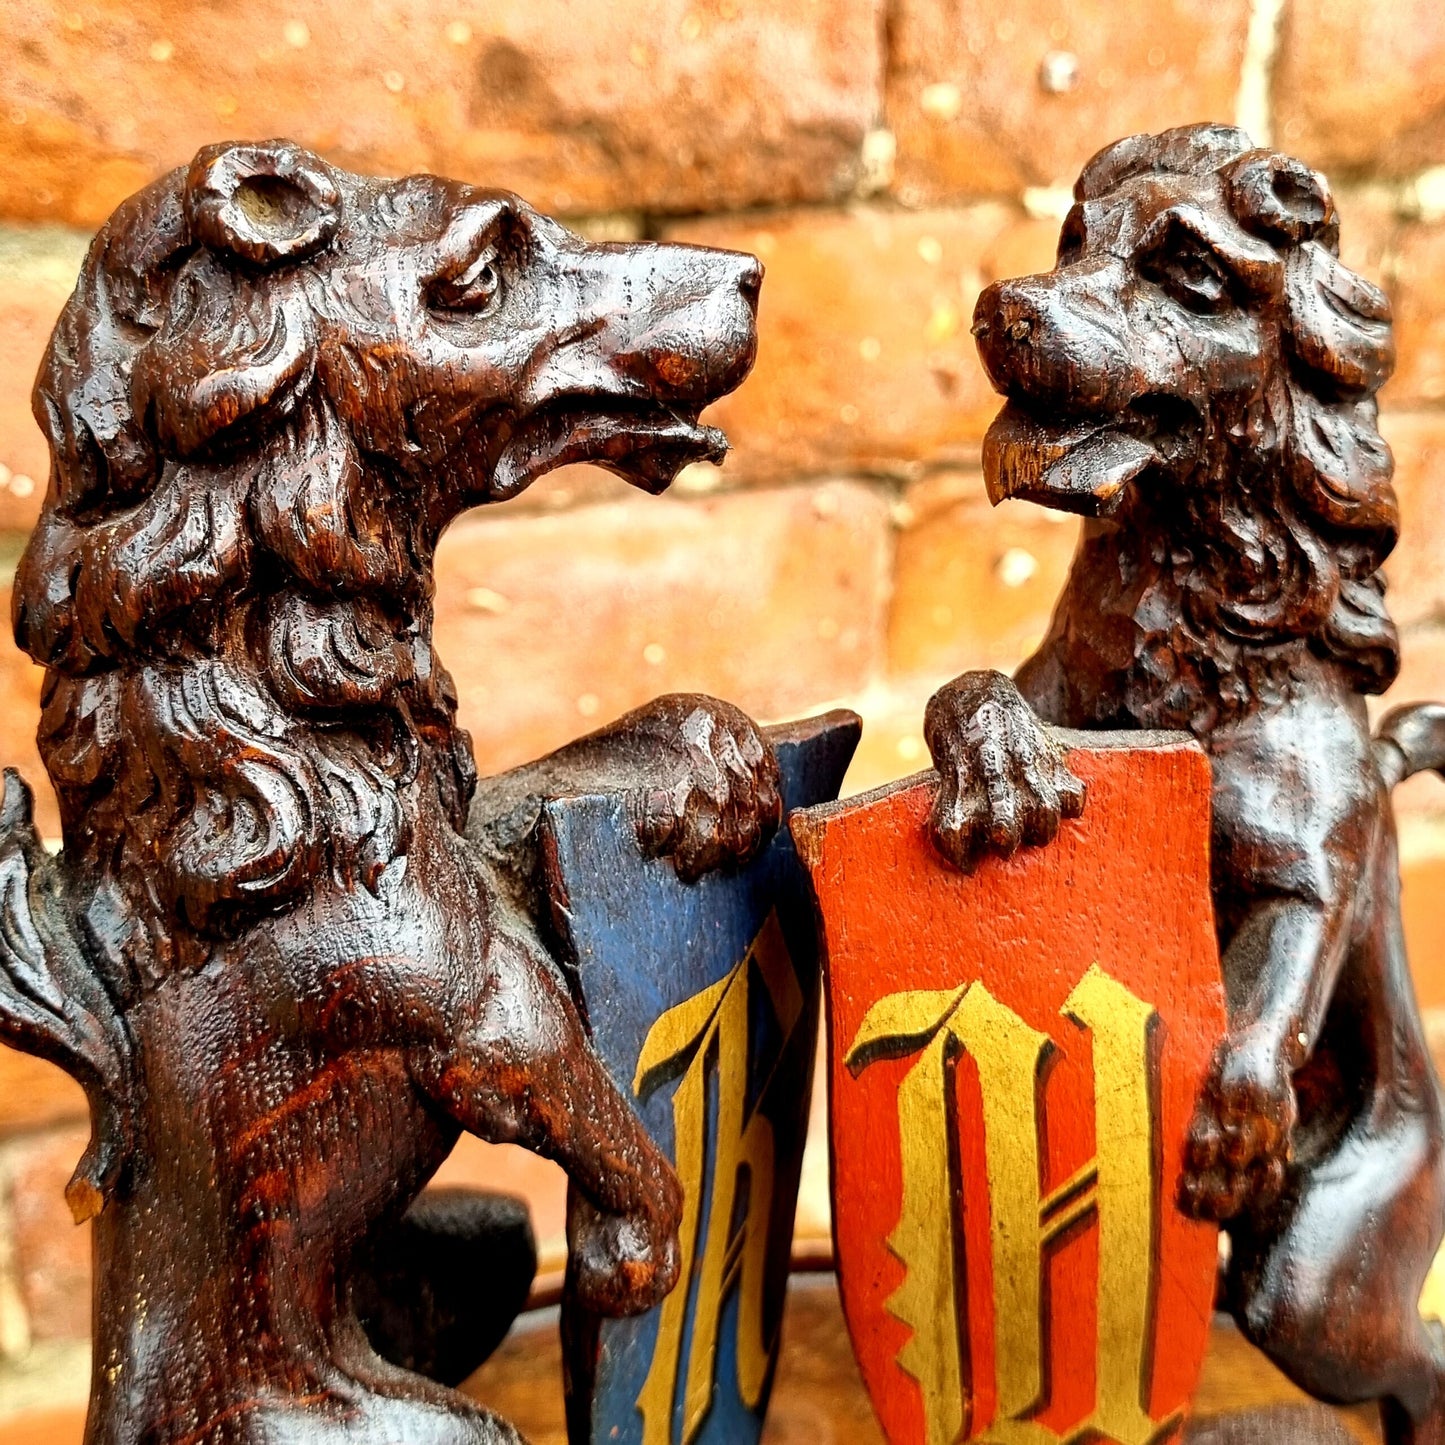 Pair of 19th Century Gothic Revival Antique Carved Oak Rampant Lions Bearing Polychromed Shields with the Initials "R" & "H"